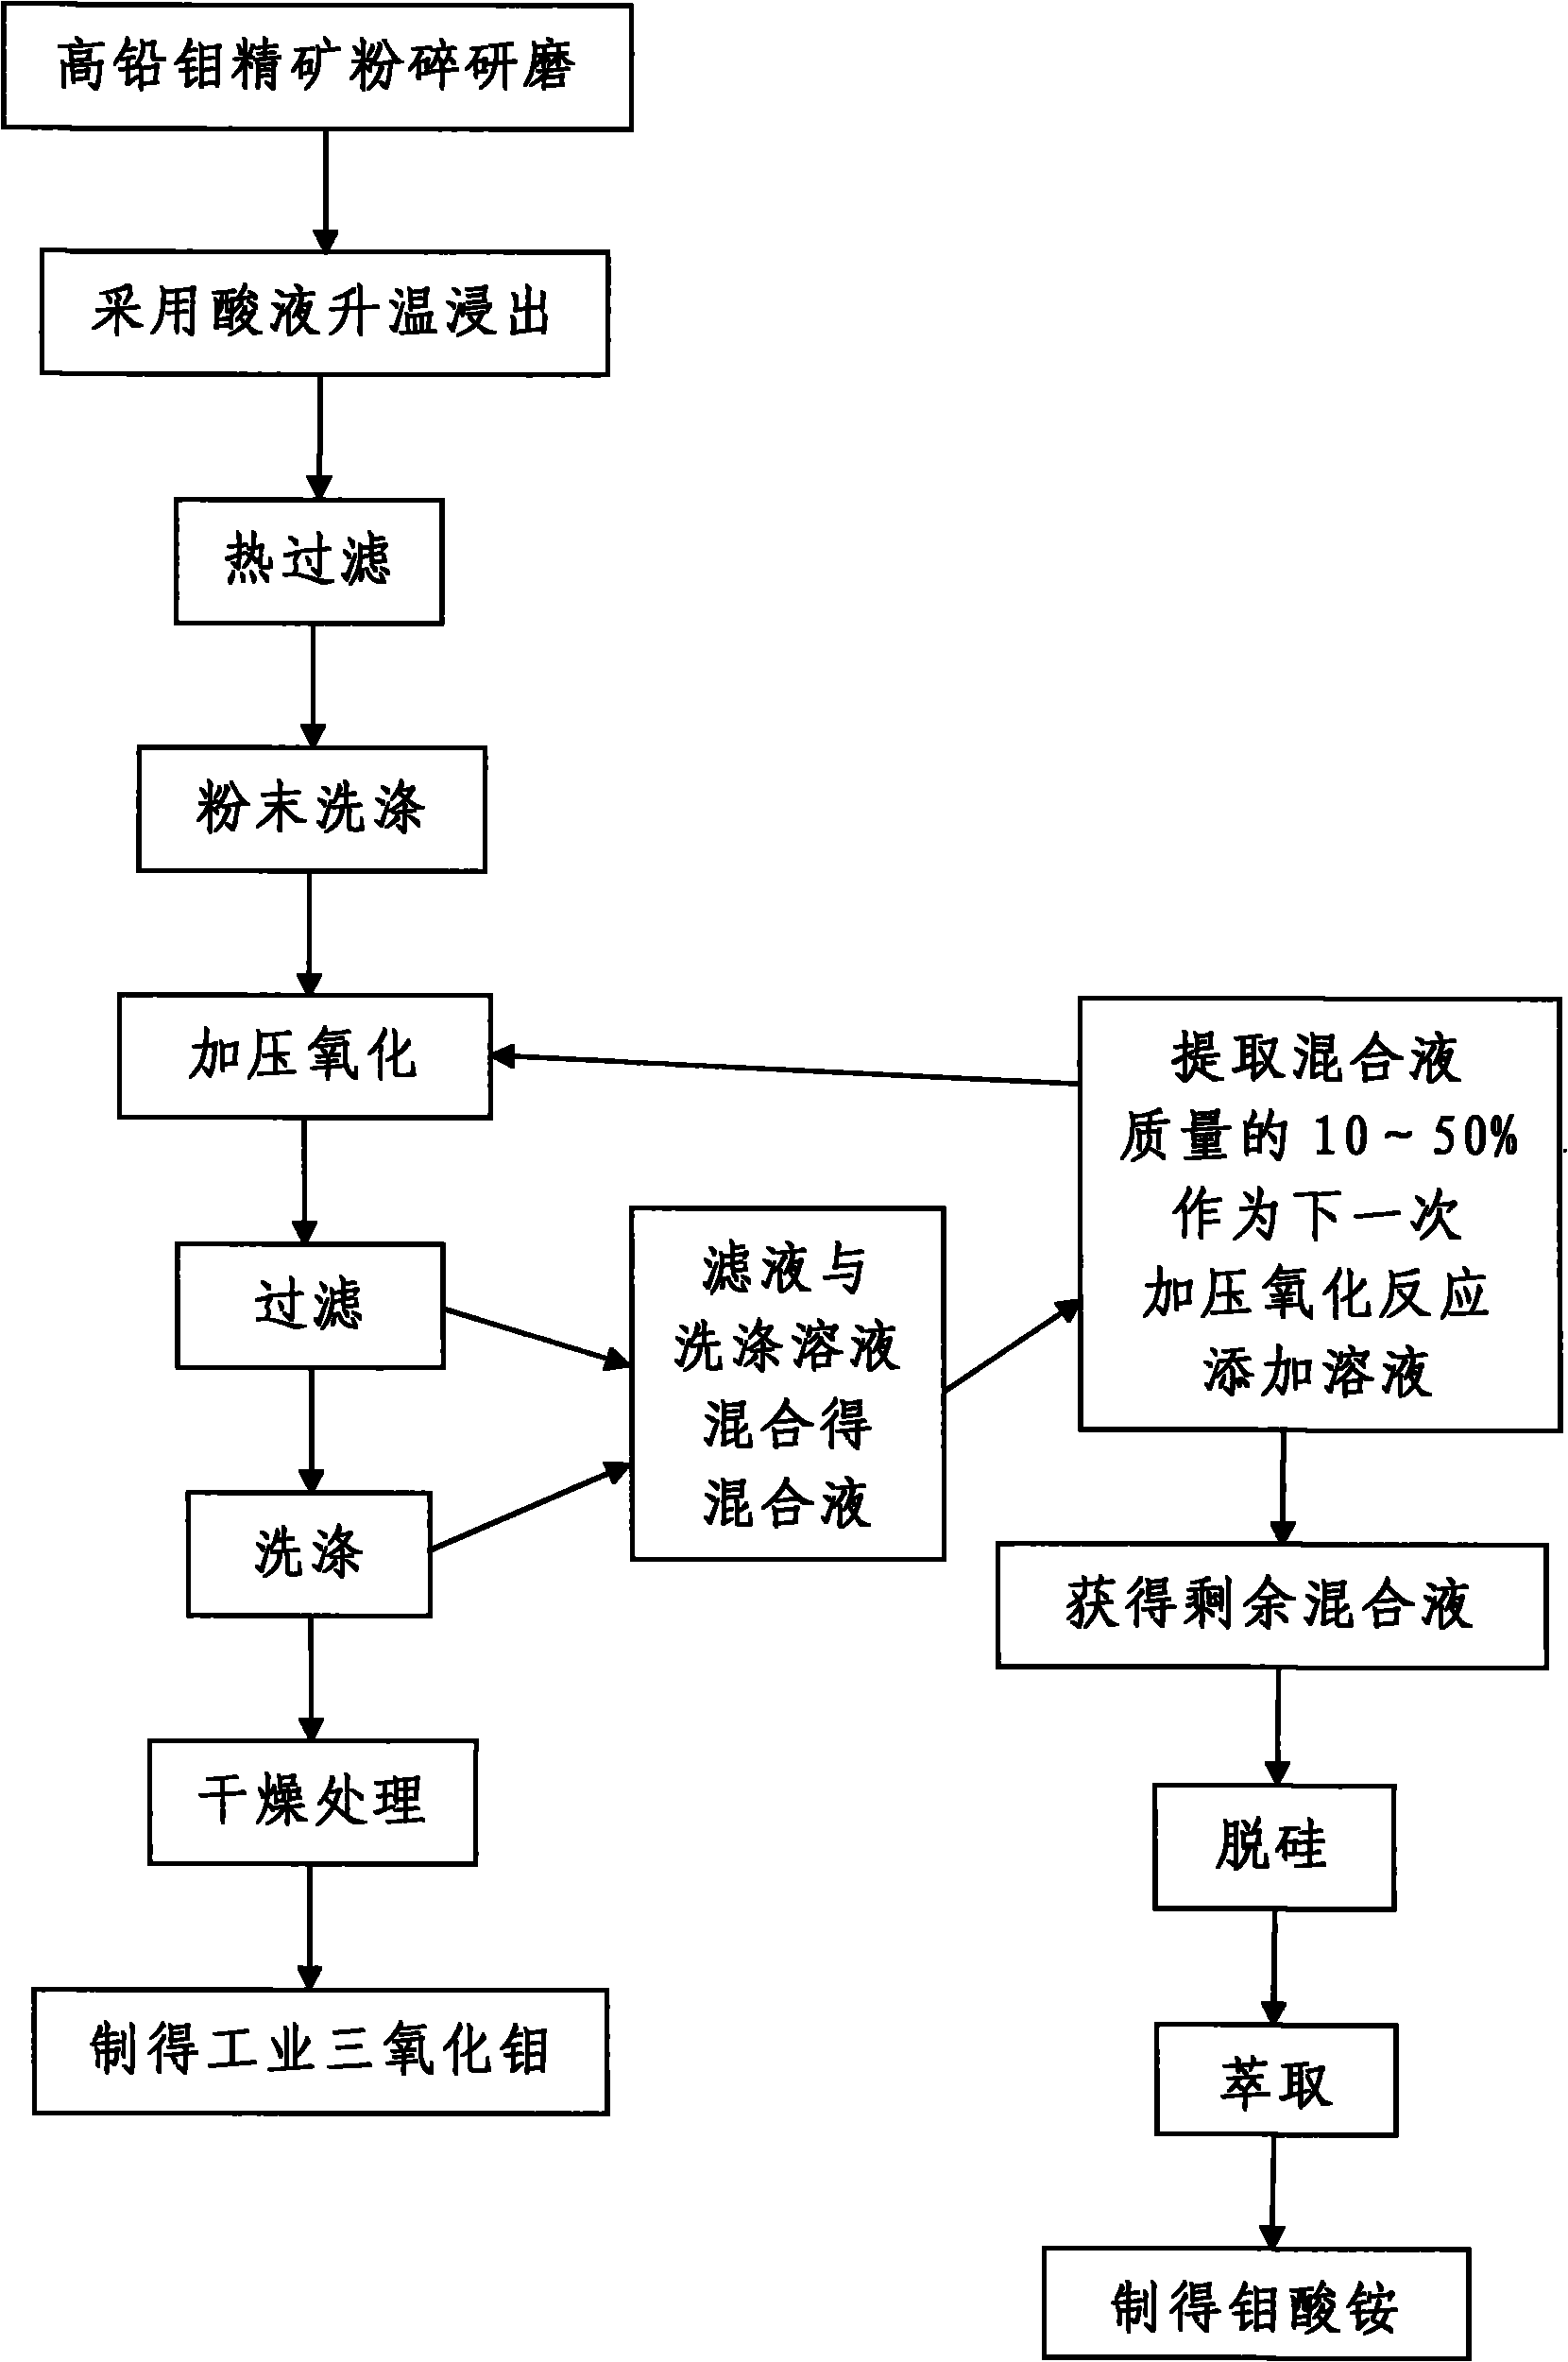 Method for producing industry molybdenum oxide from molybdenum concentrate